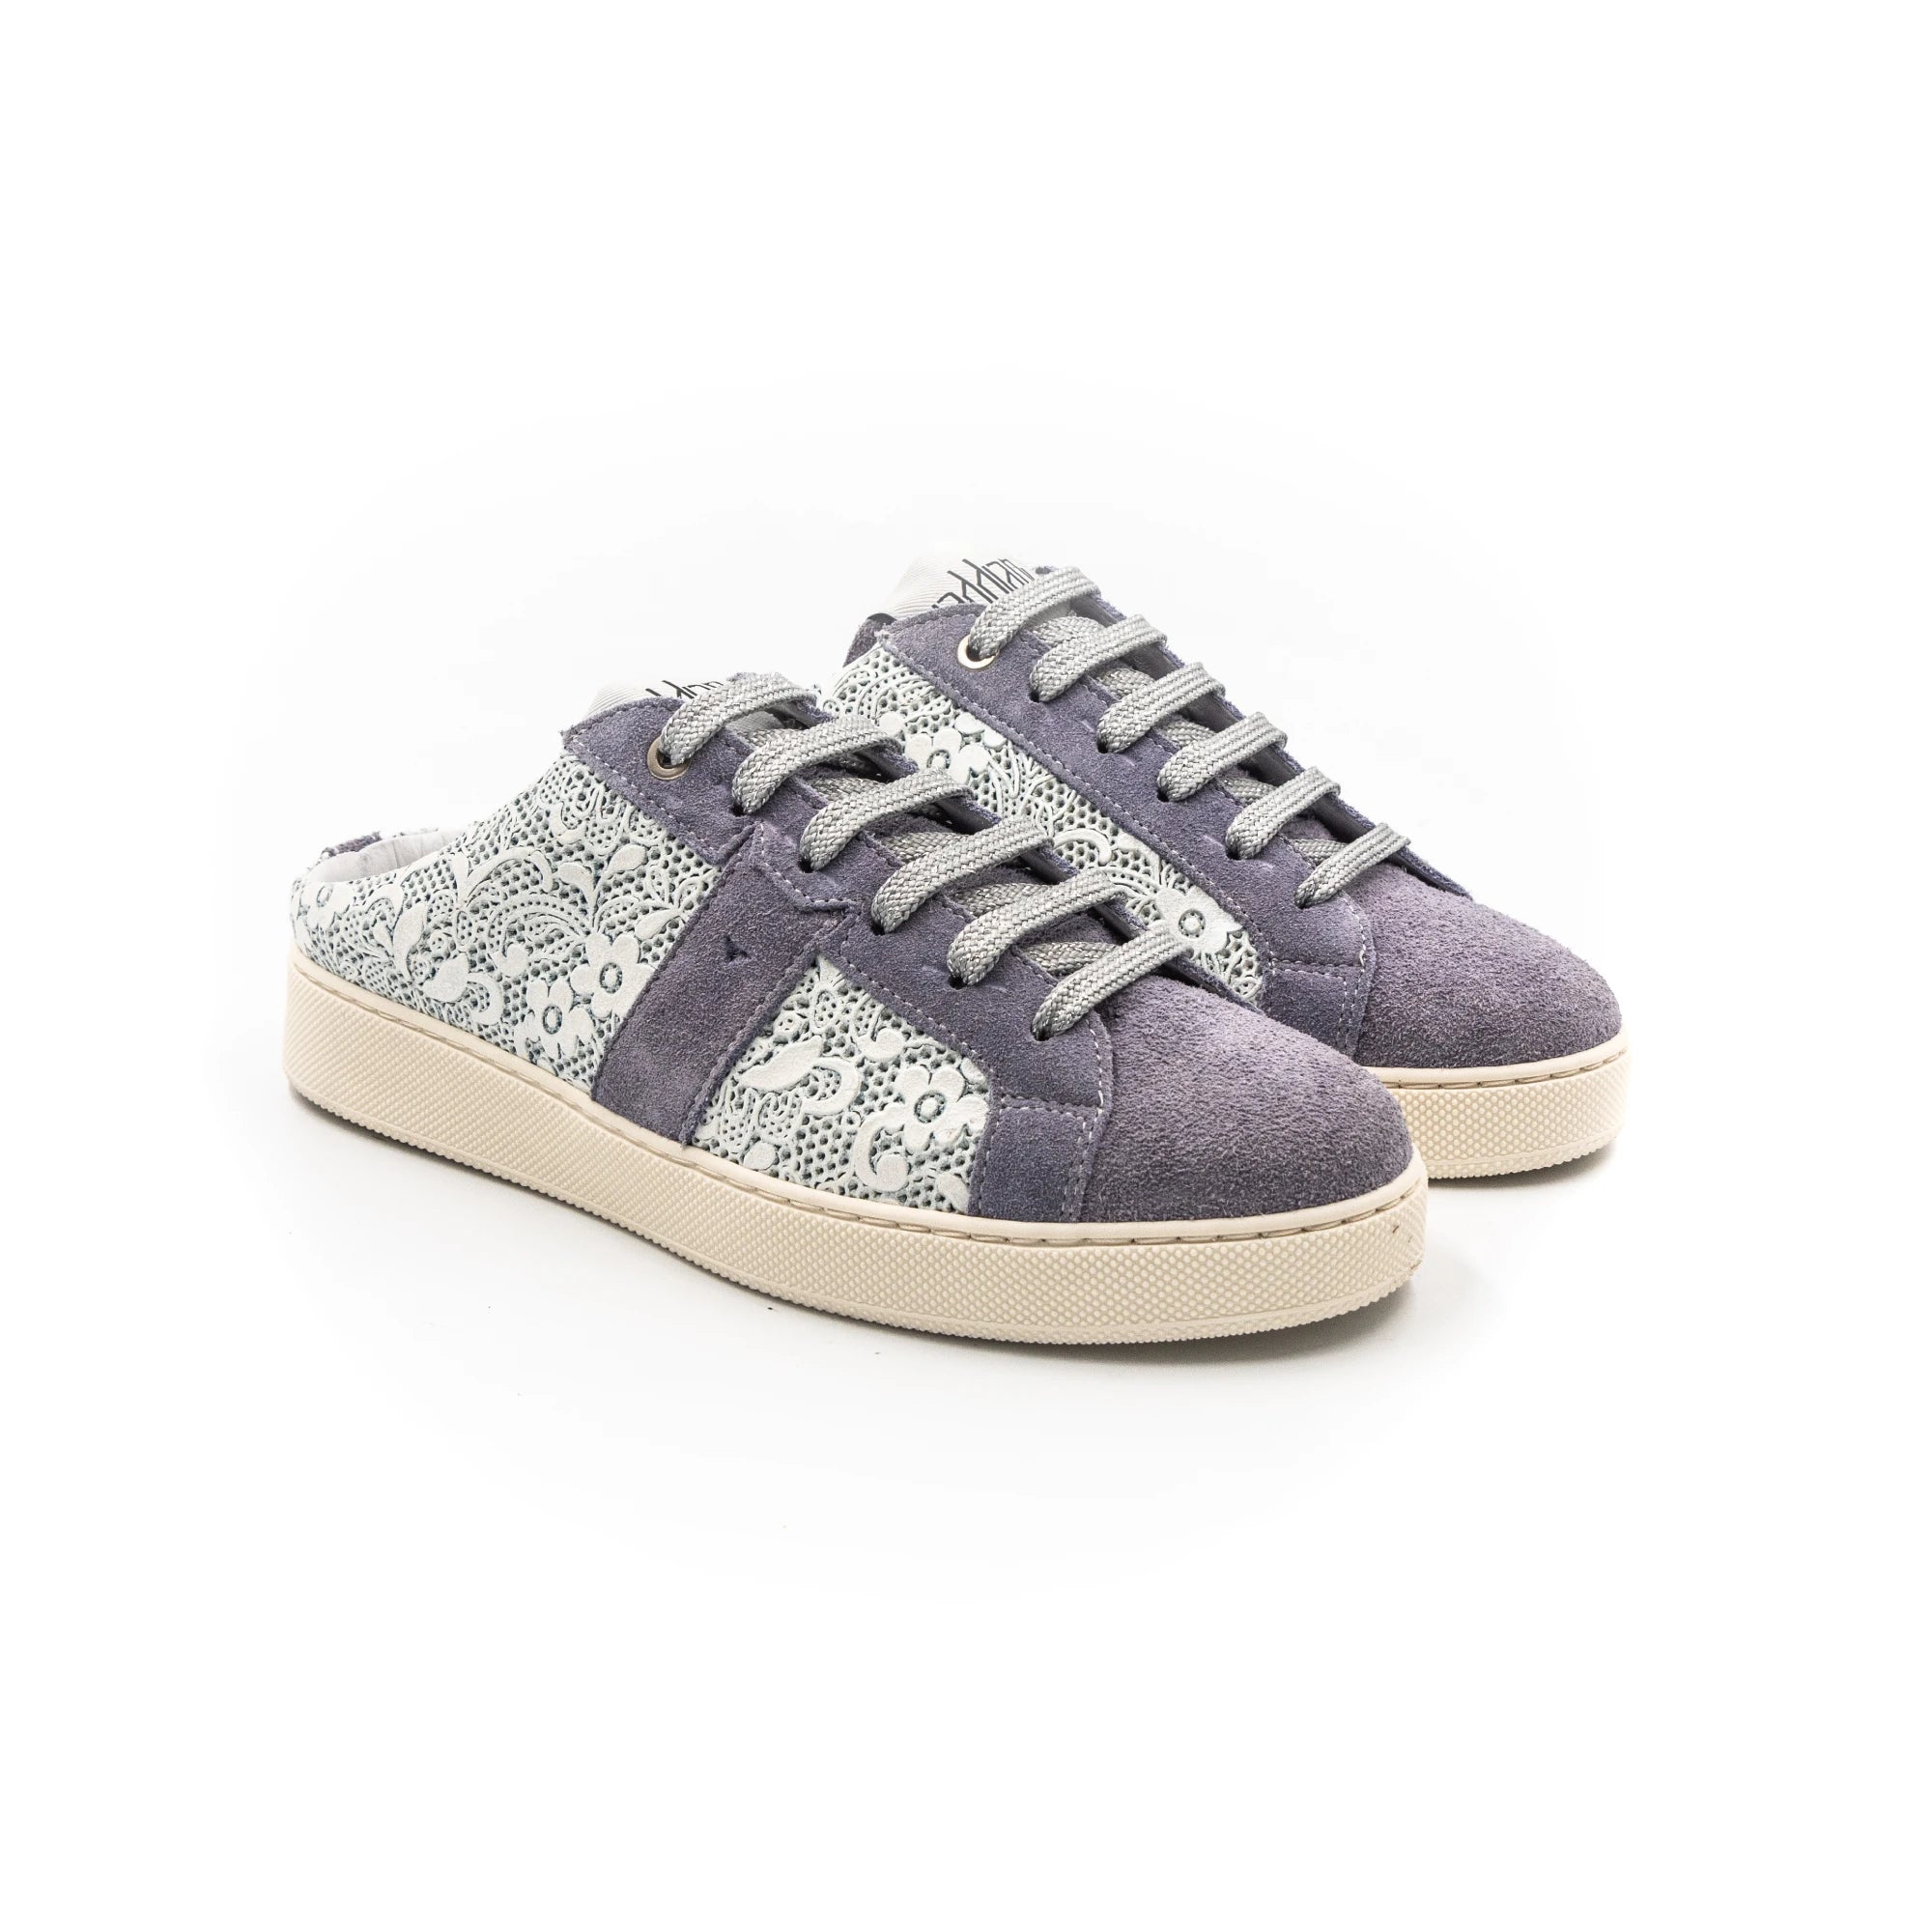 Purple sneakers with white lace and beige rubber.